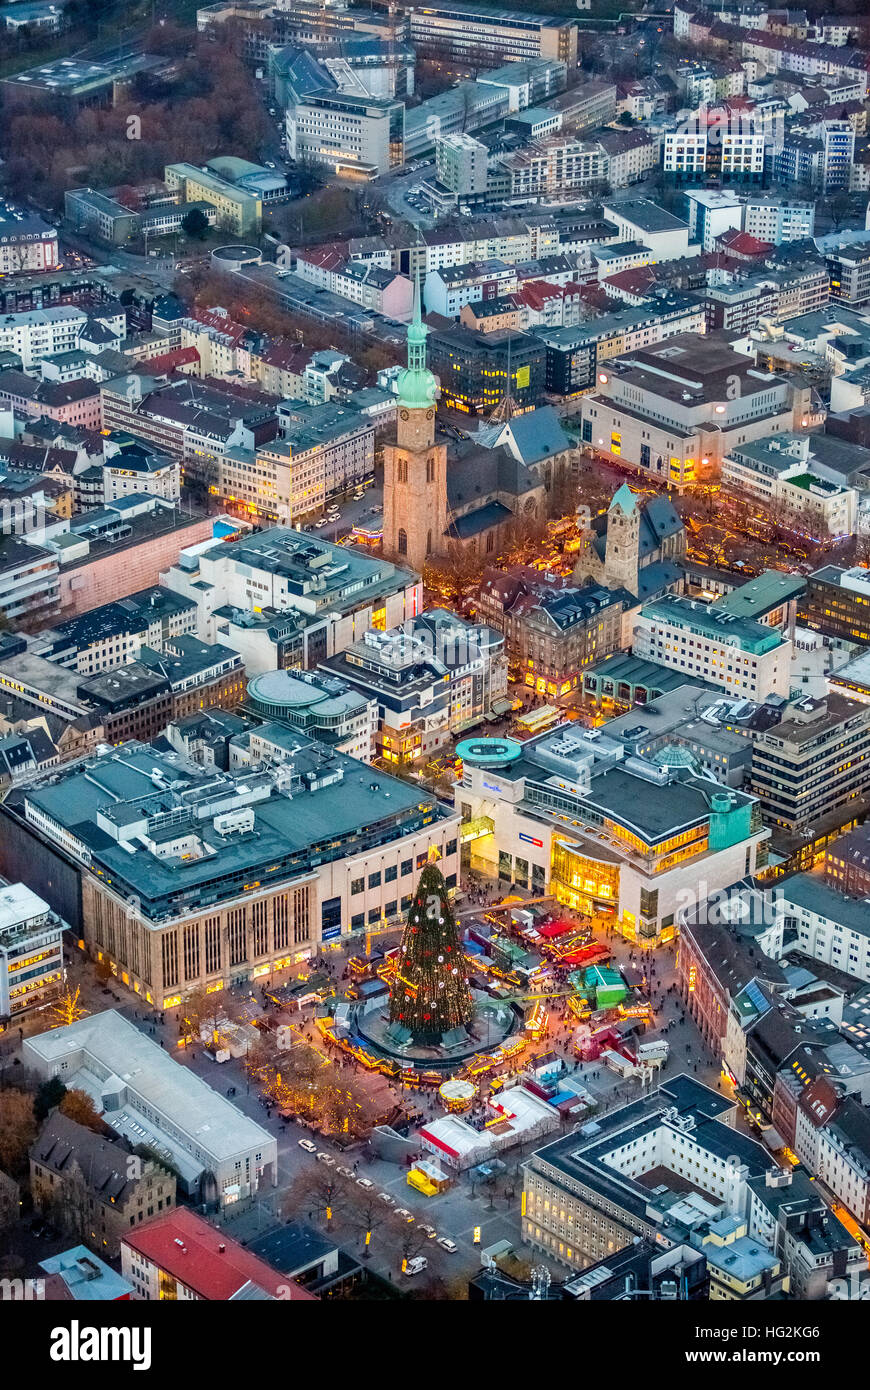 Aerial view, the biggest Christmas tree in the world is in Dortmund at the Christmas market, Hansaplatz, stalls, Christmas stall Stock Photo